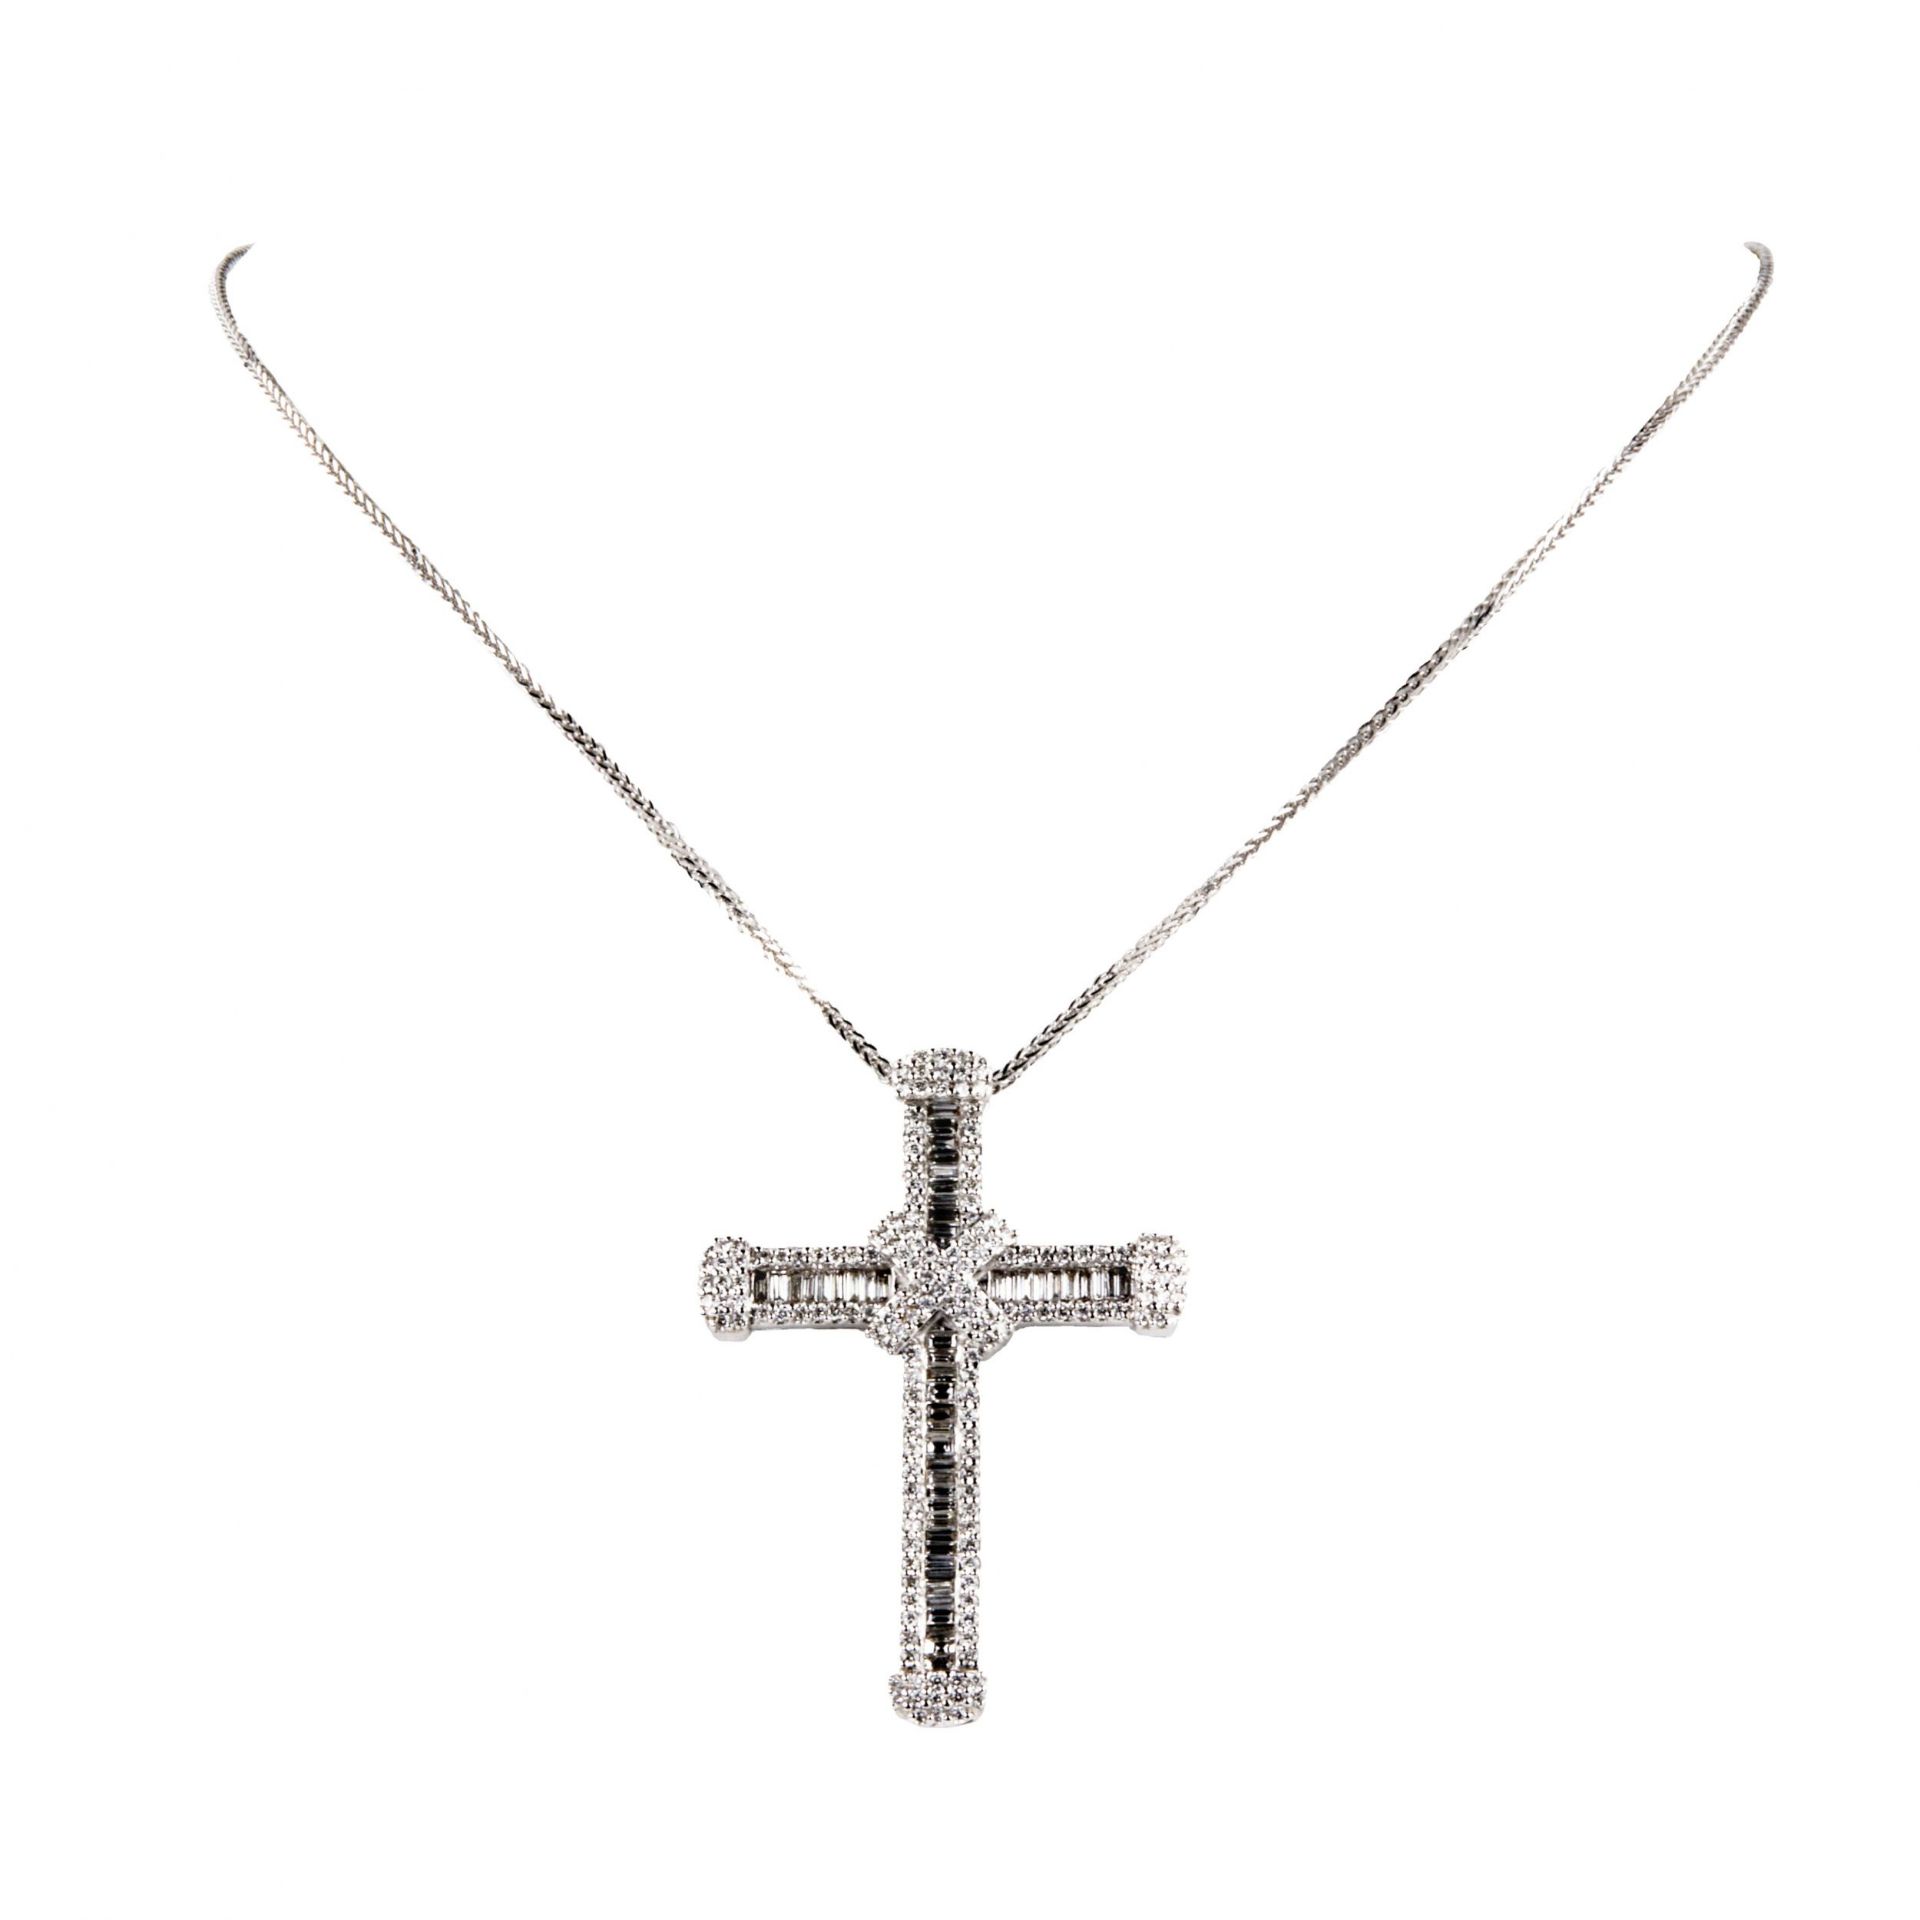 Gold necklace with diamond cross pendant. - Image 2 of 7